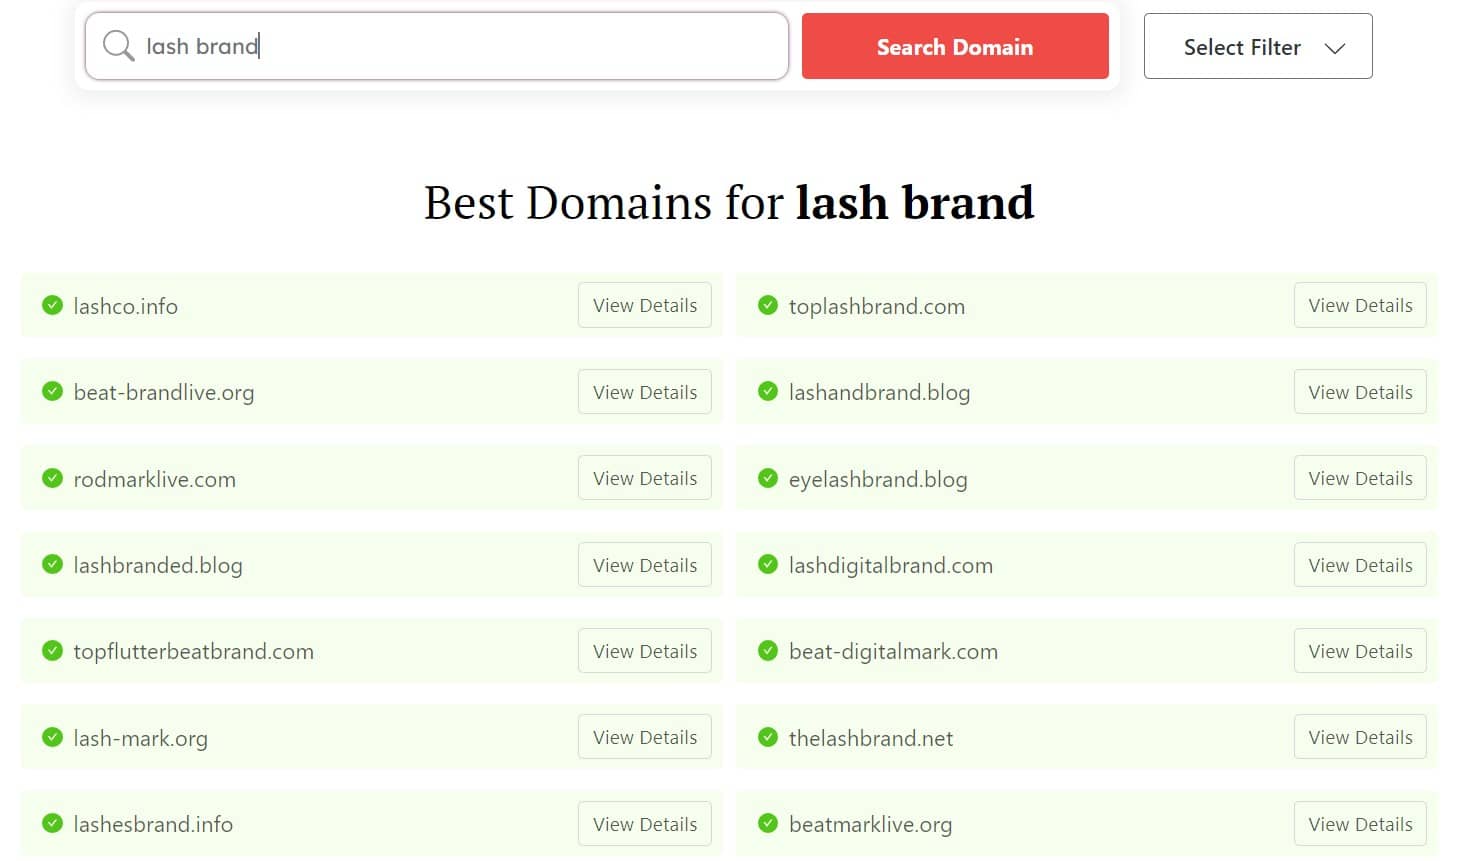 "Lash brand" search results from DomainWheel lash business name generator